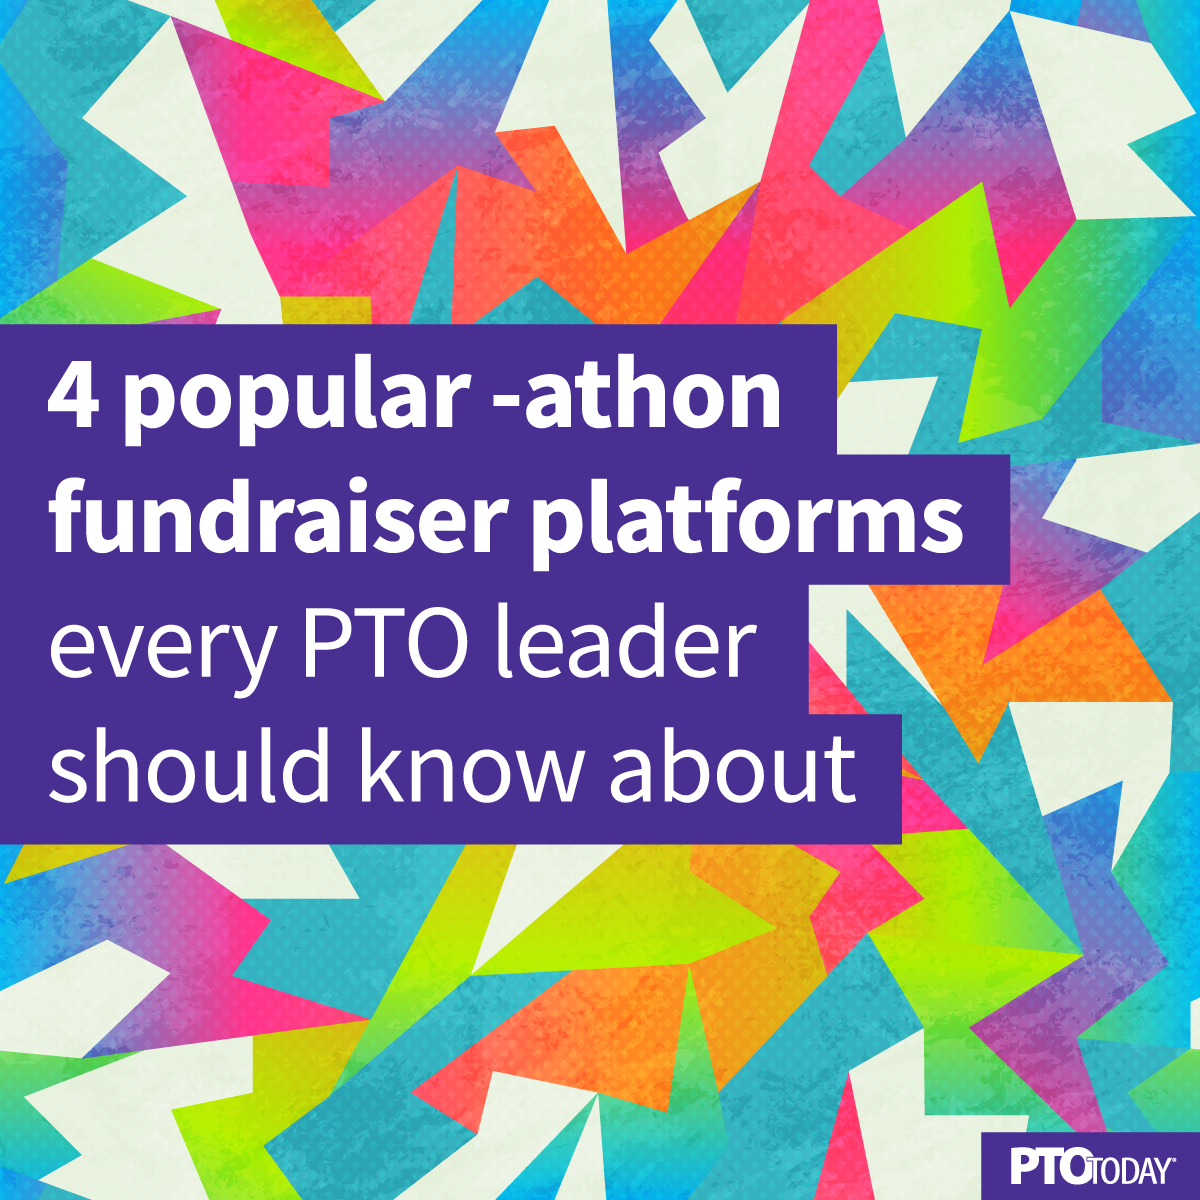 Popular -athon fundraiser platforms every leader should know about